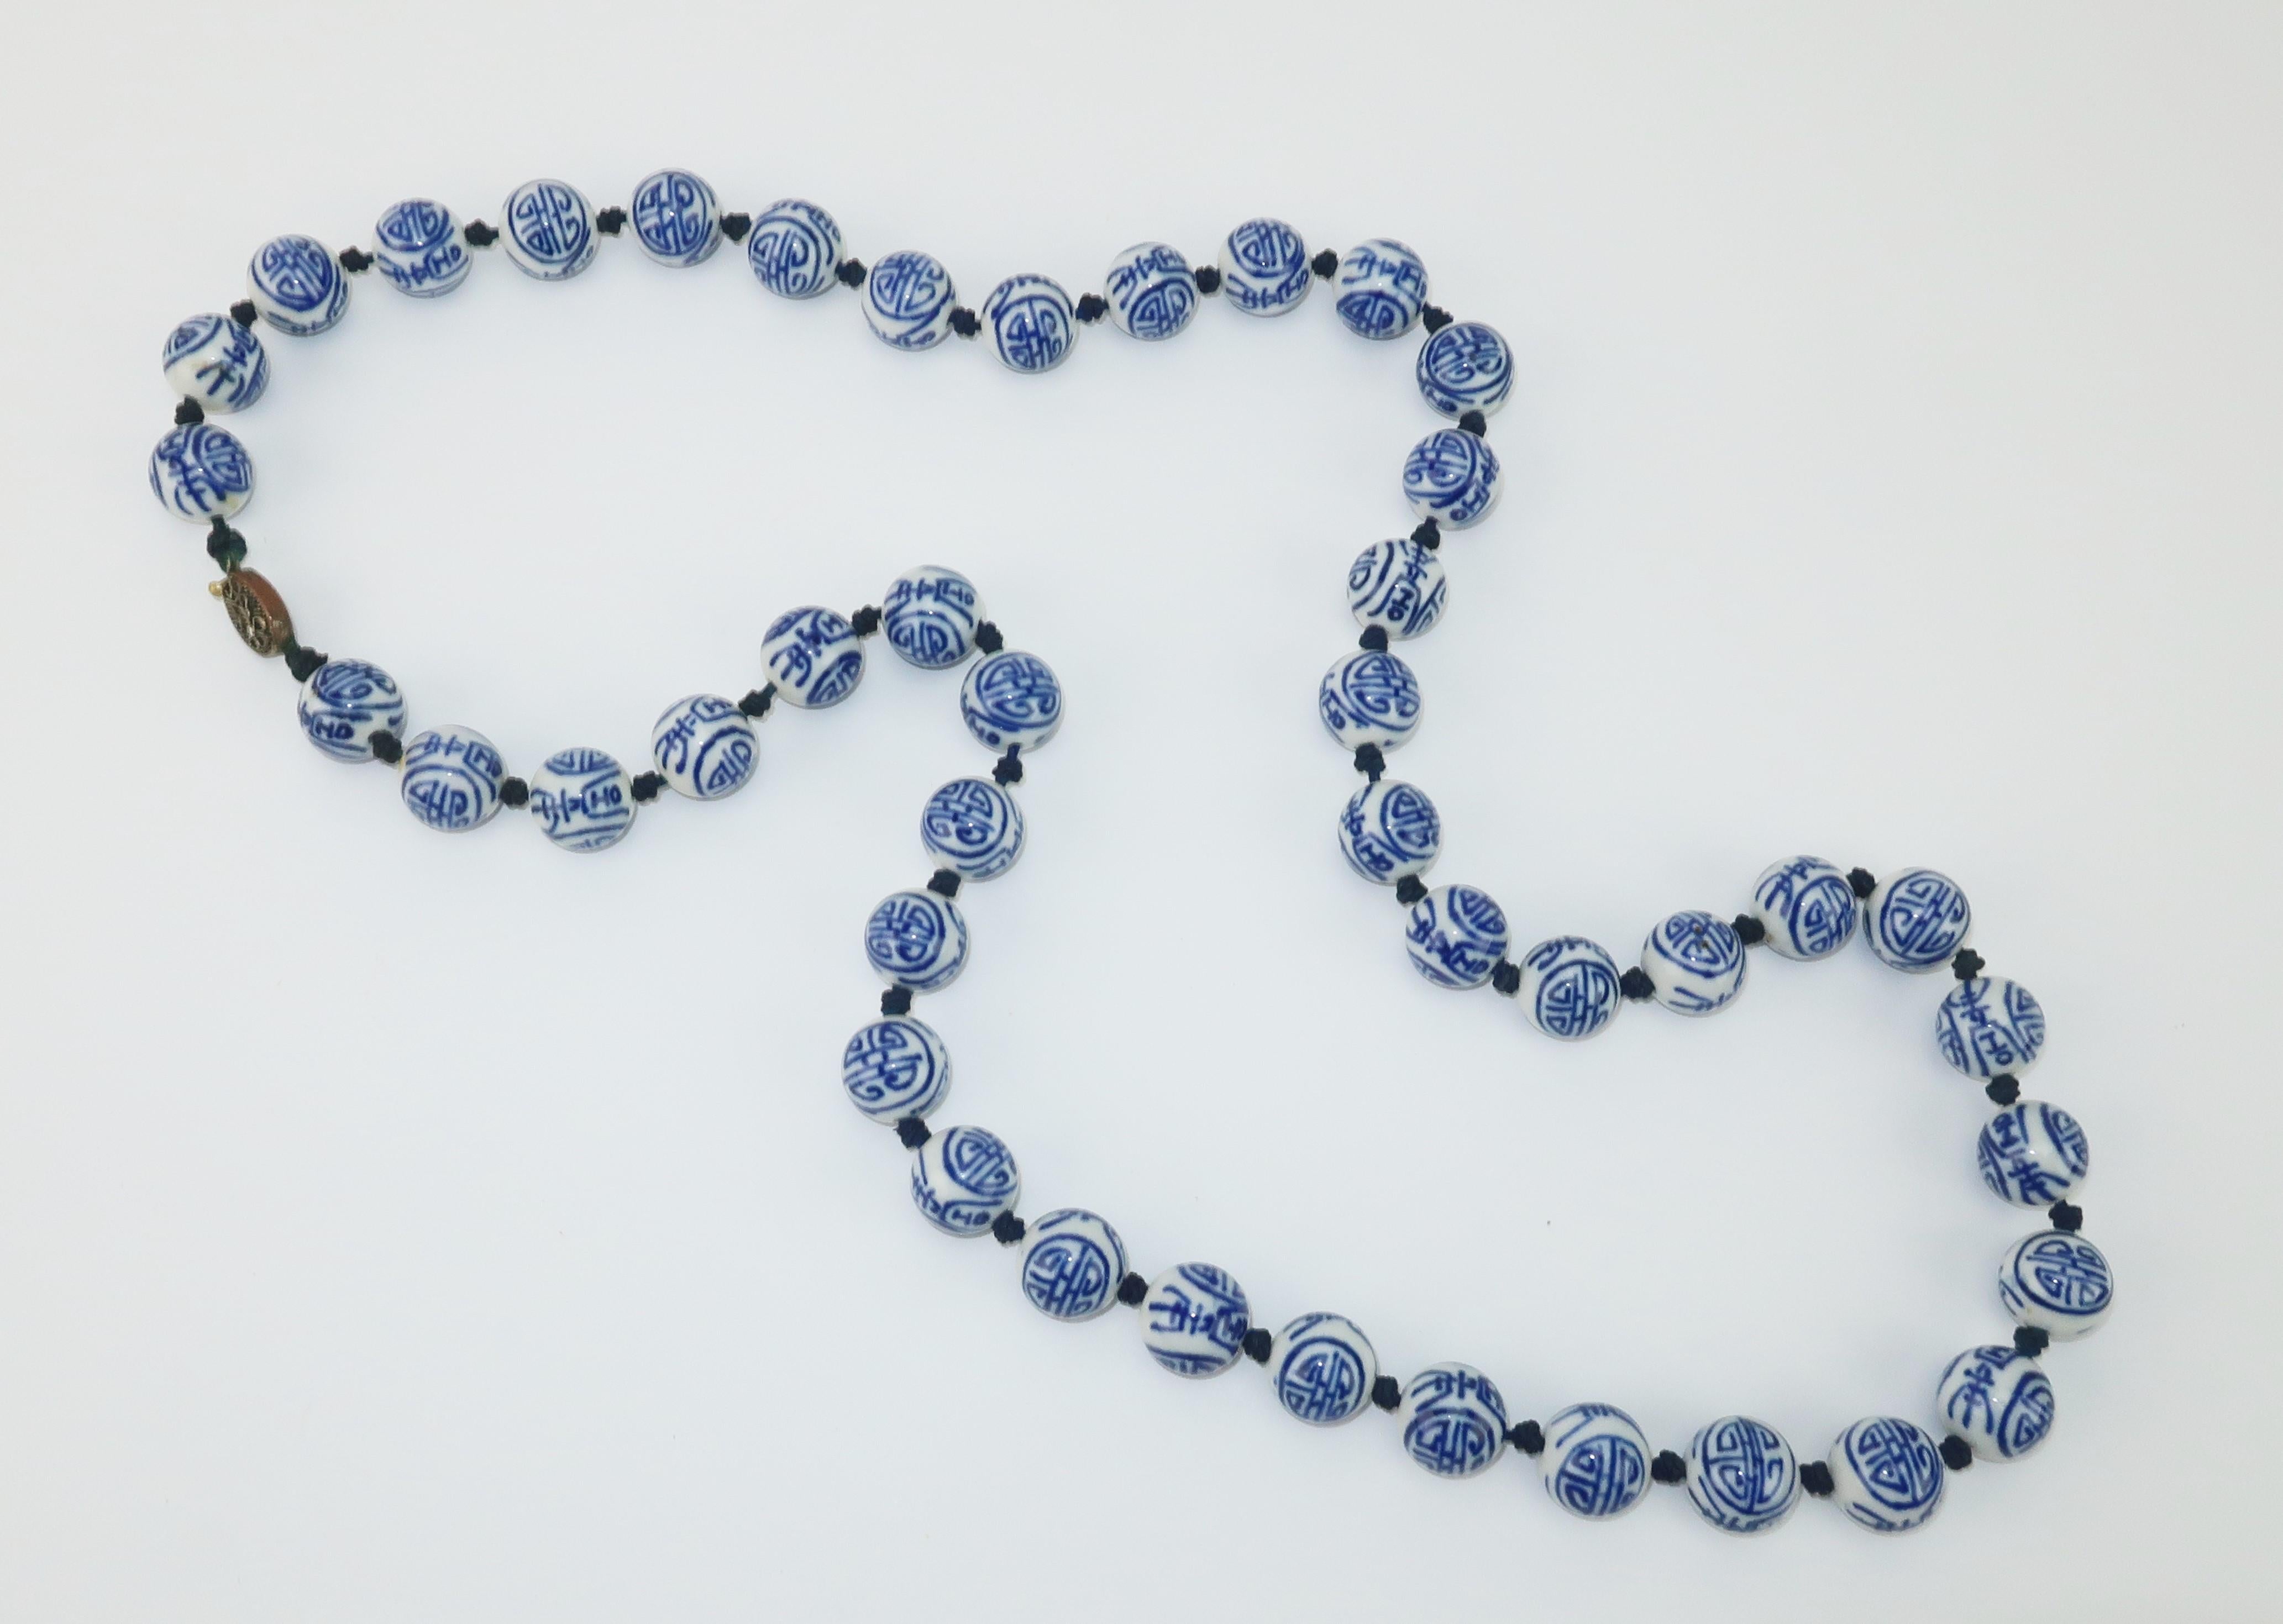 1950's blue and white Chinese porcelain beads strung with knotted silk cord and outfitted with a brass filigree push clasp closure.  No maker's mark.  Wear as a single strand or double up to wear as a choker.
CONDITION
Good vintage condition with